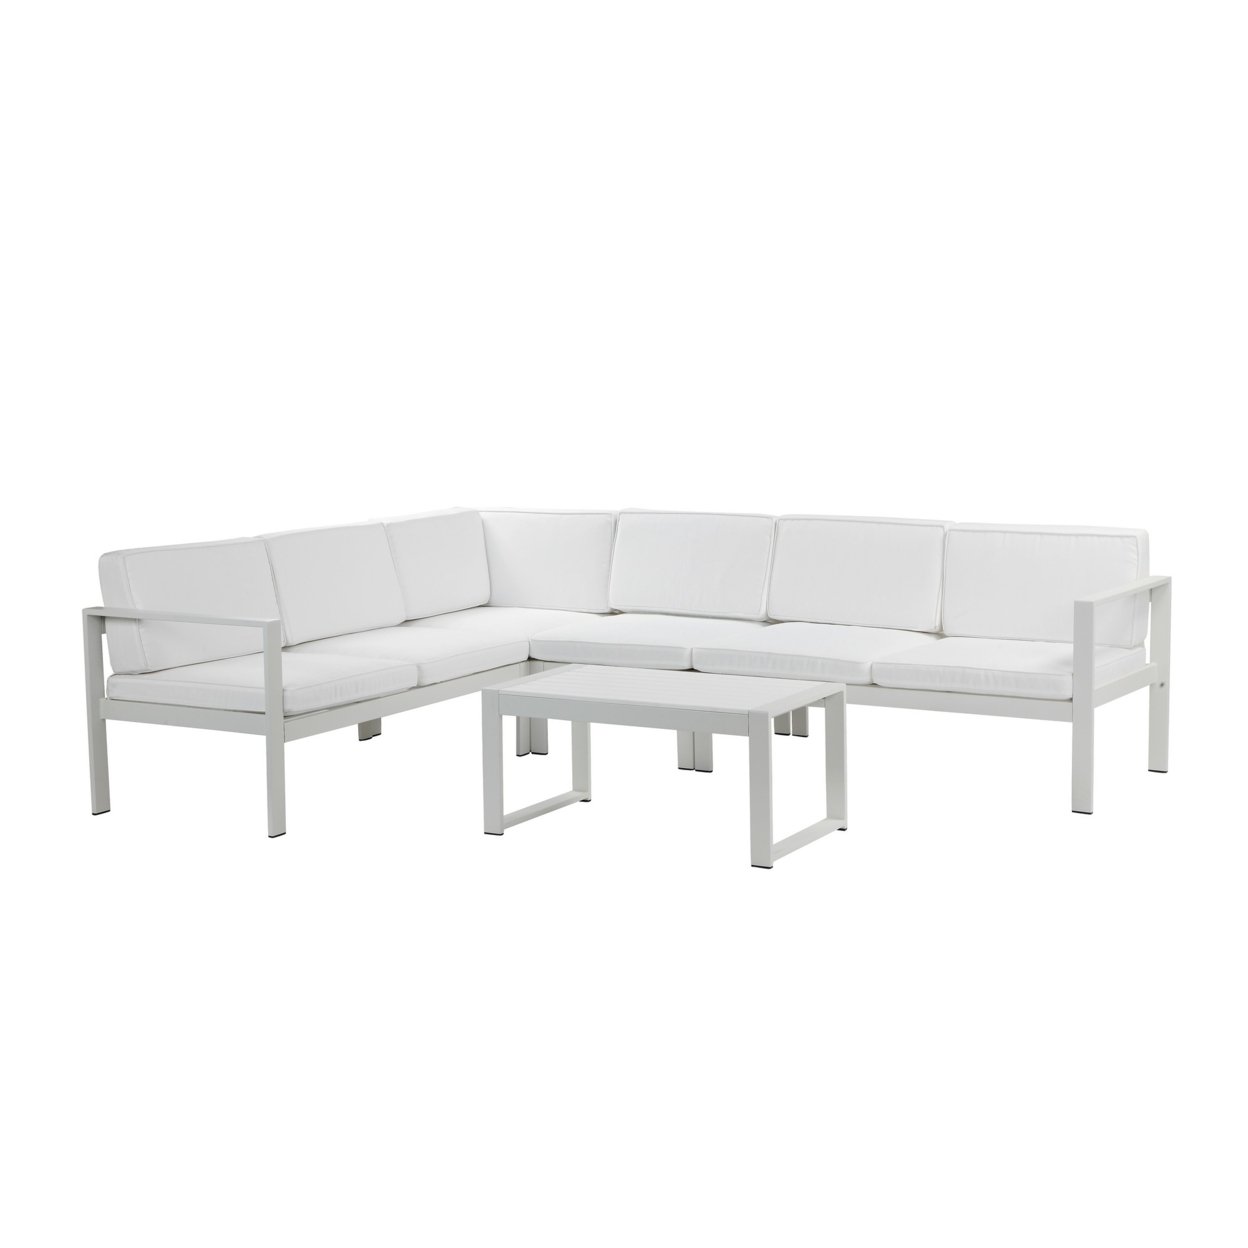 4 Piece Fabric Upholstered Sectional Sofa With Table, White- Saltoro Sherpi